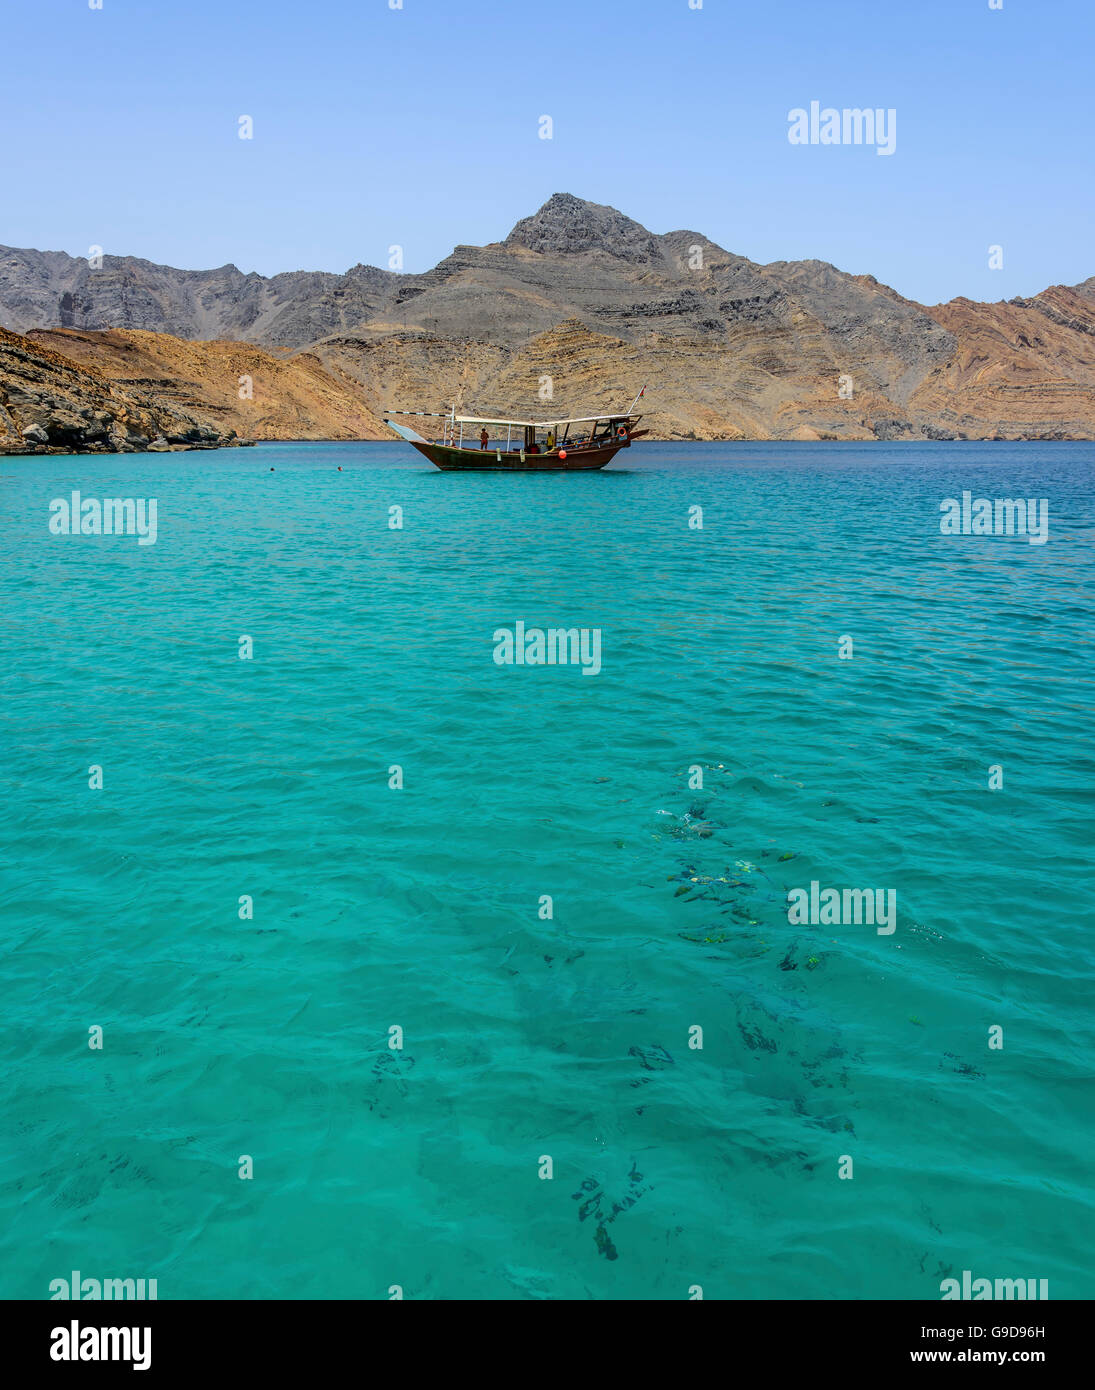 Traditional Arabic Dhows with tourists and fishes in th wild fjord of Musandam peninsula, Sultanate of Oman Stock Photo